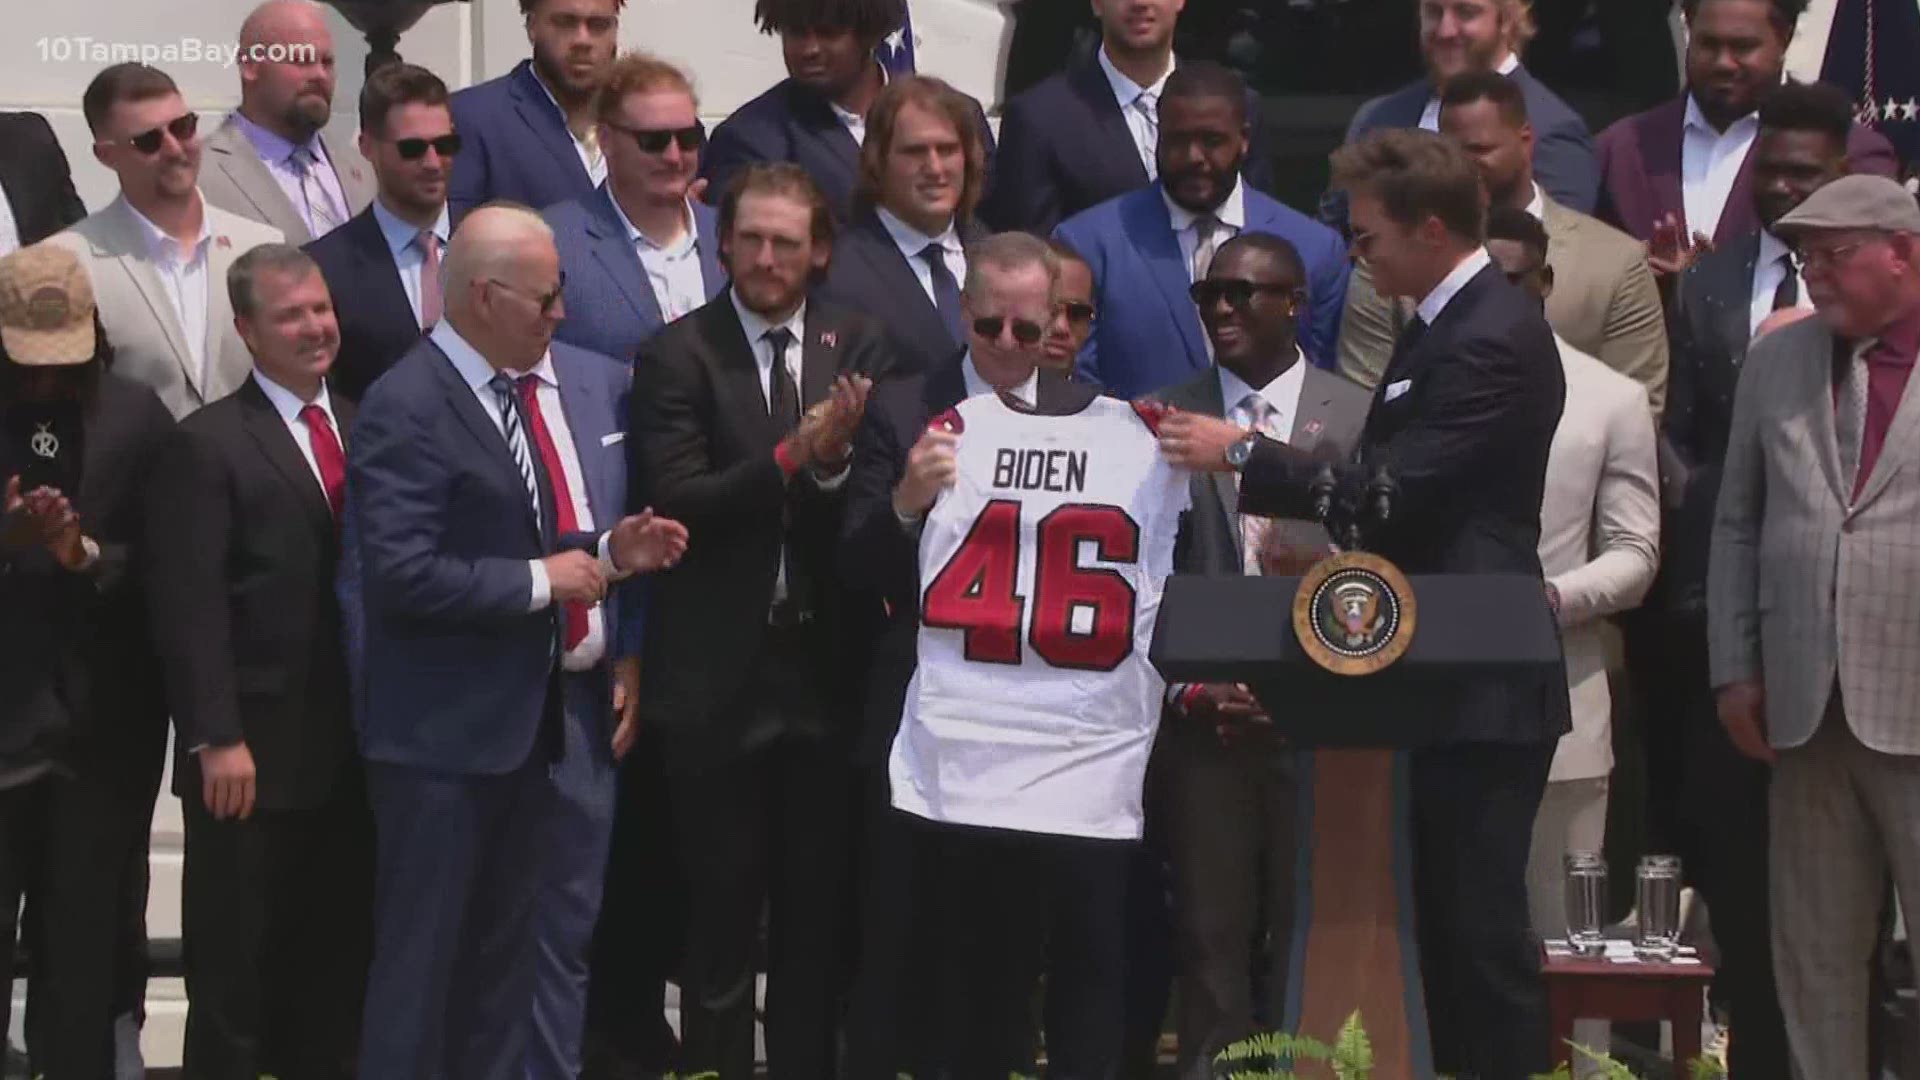 Tom Brady and the Tampa Bay Buccaneers celebrated their historic Super Bowl Championship at the White House on Tuesday.